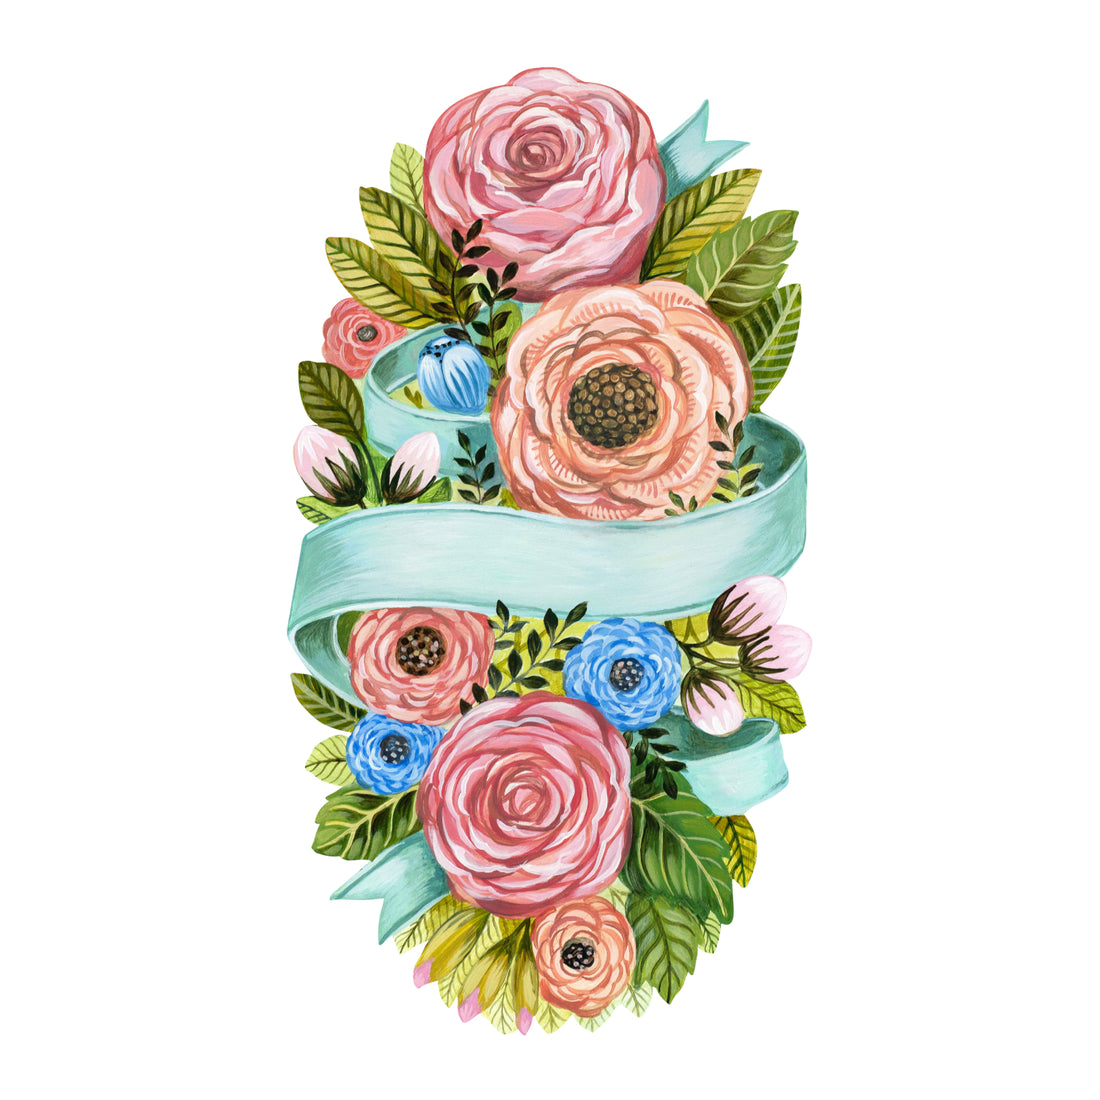 A whimsical die-cut illustrated bouquet of pink, orange and blue flowers with vibrant green leaves, adorned with a seafoam ribbon which creates a space for personalization.